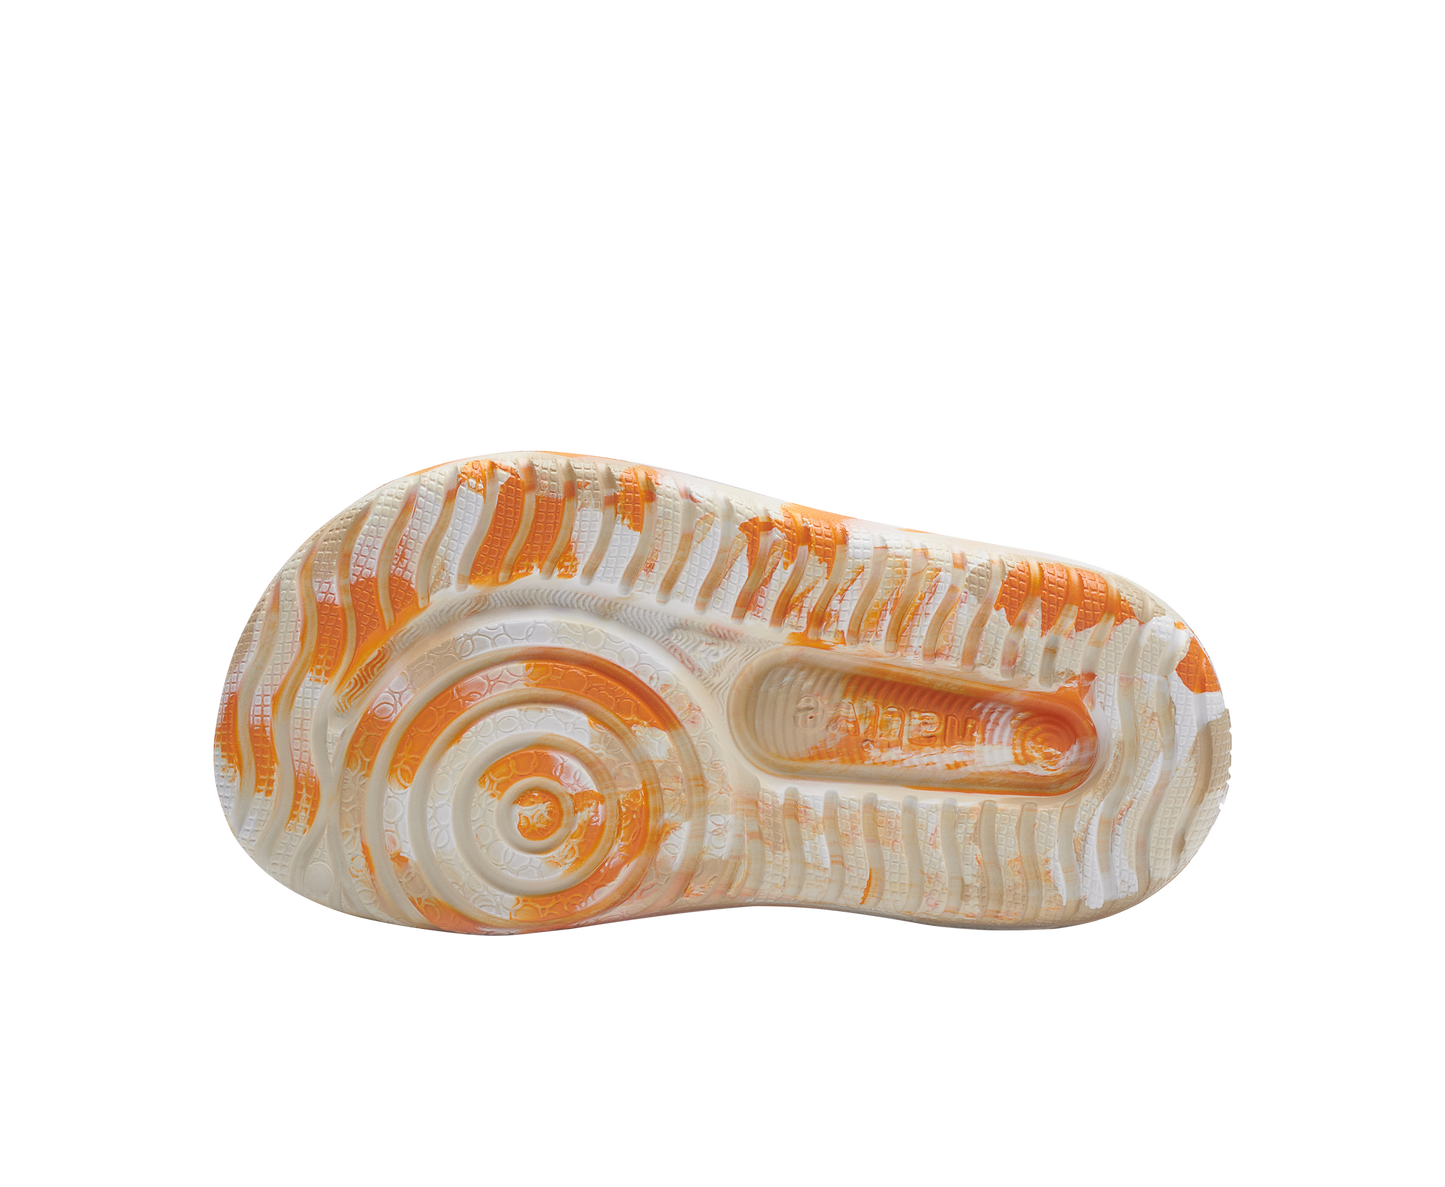 Chase Marbled Sandal - Bone/Apricot Marble